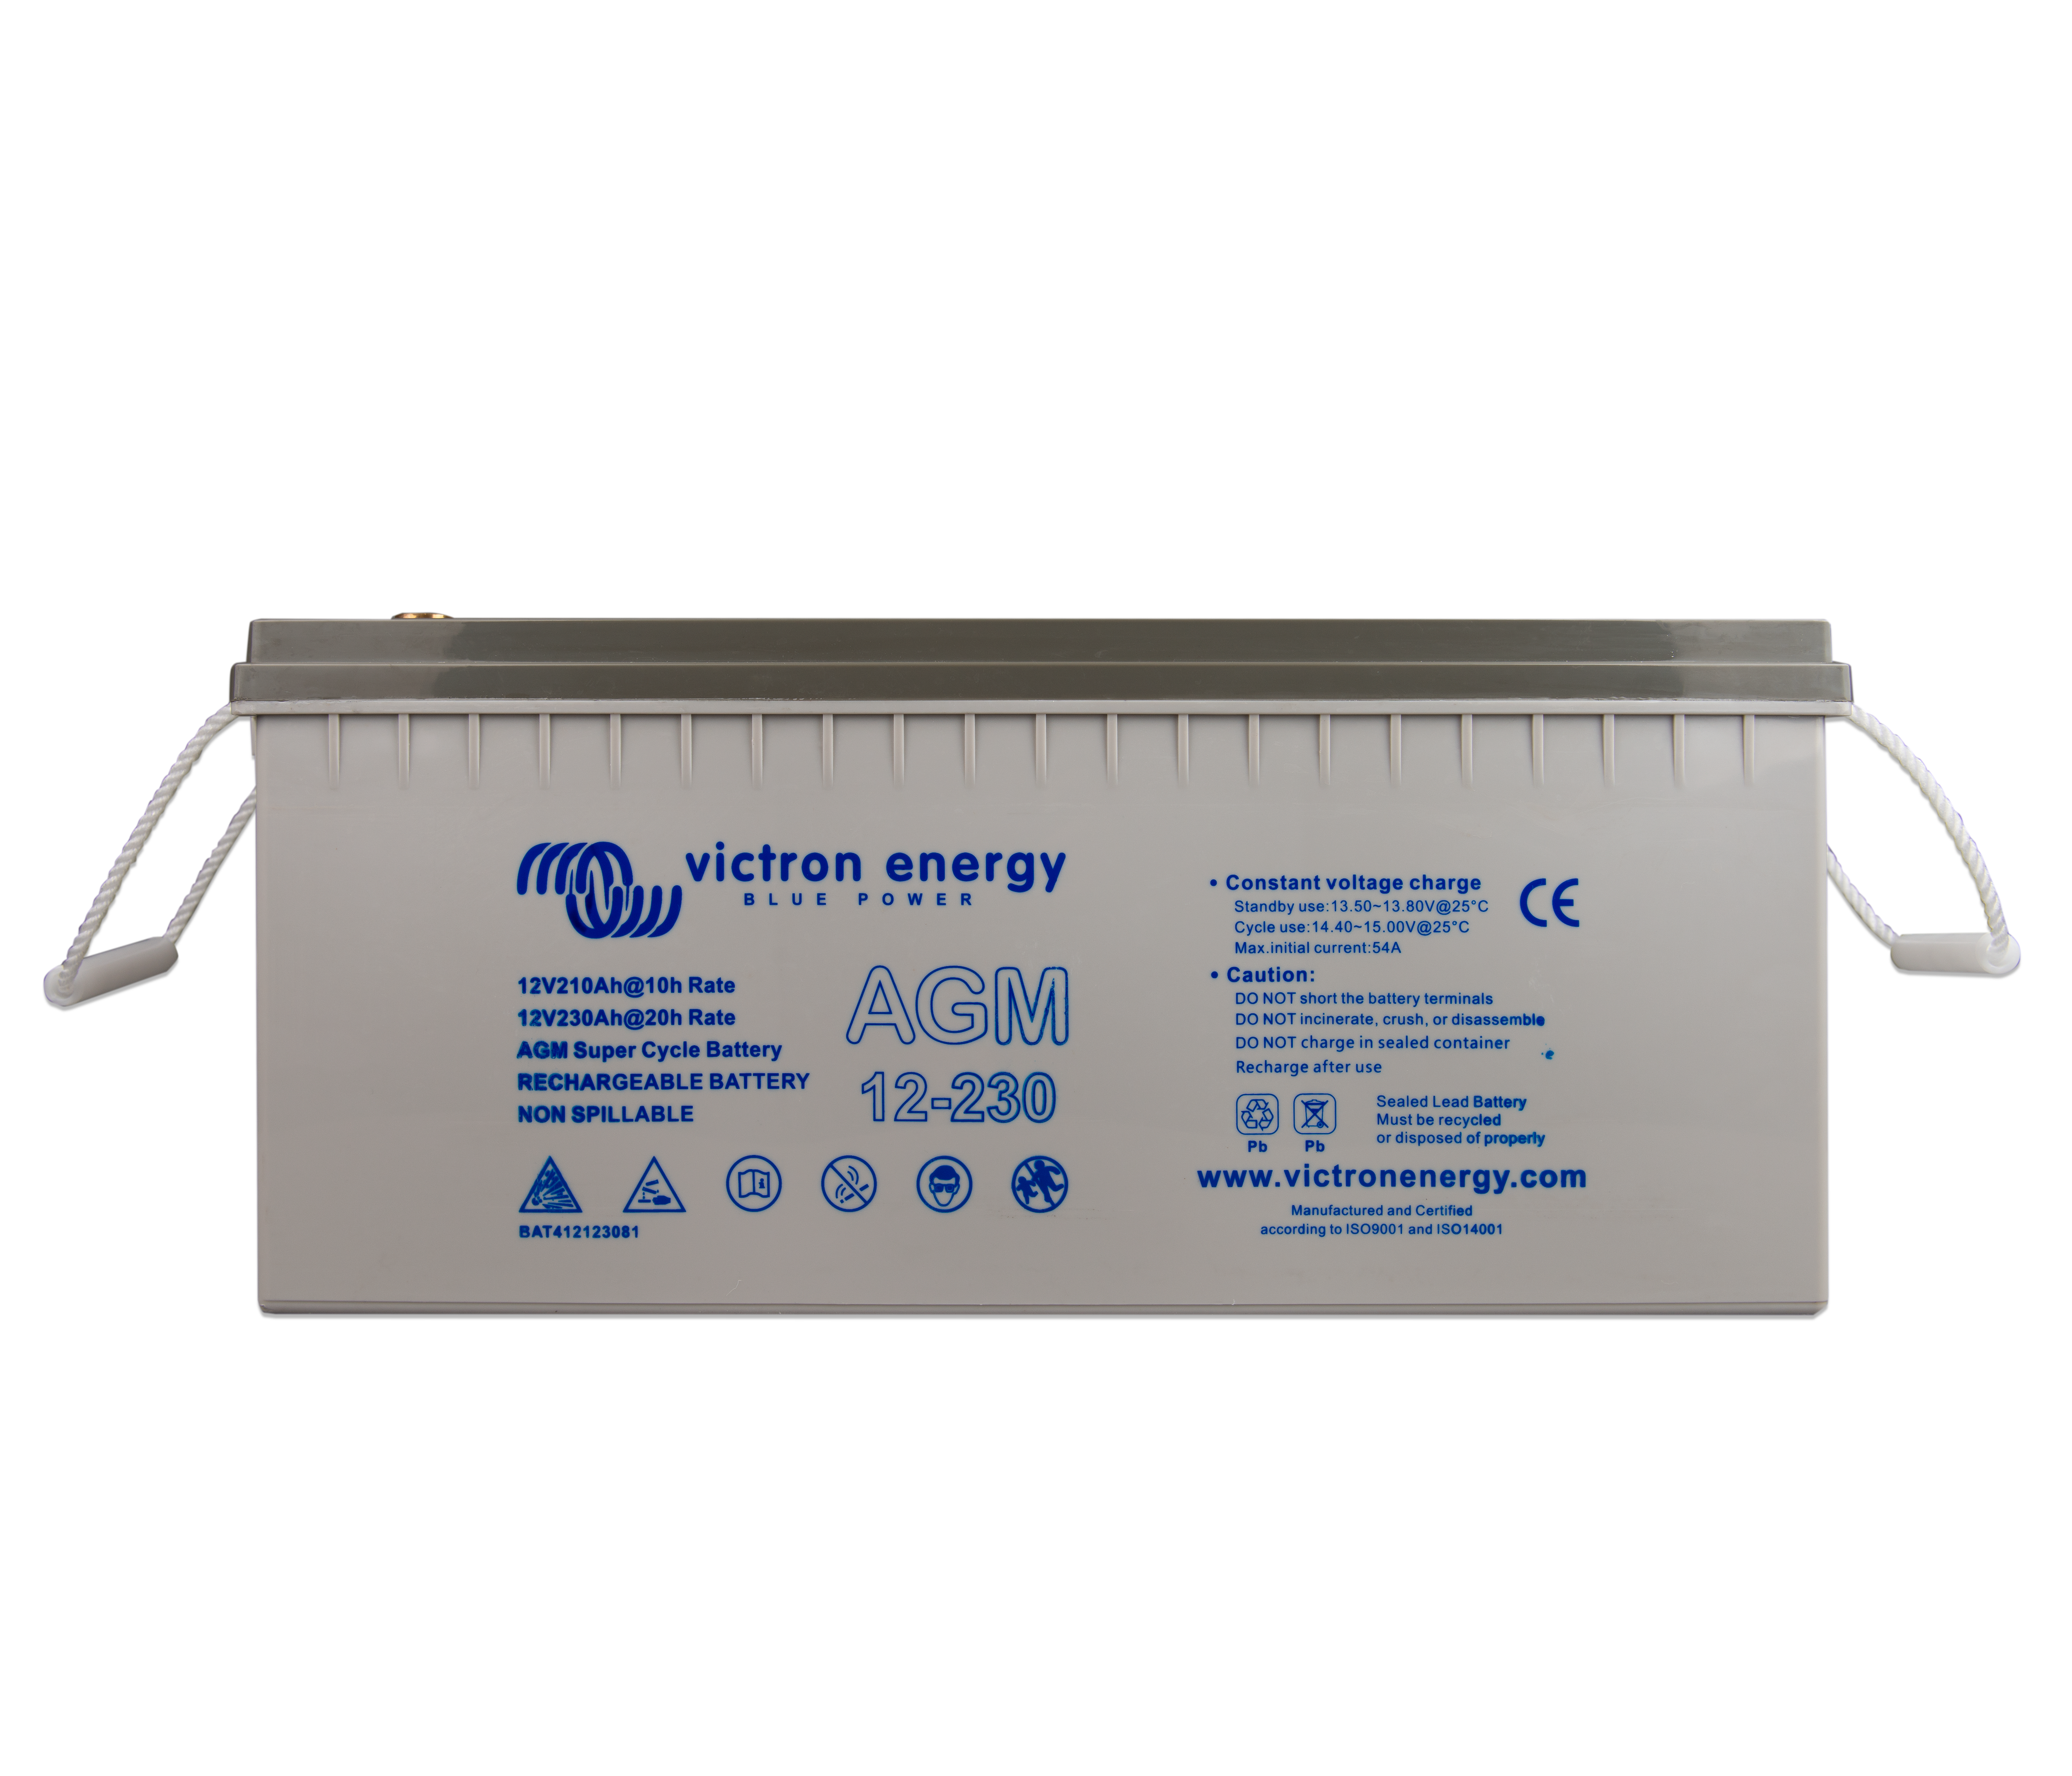 Batterie solaire AGM 230Ah-12V Super Cycle Victron Energy